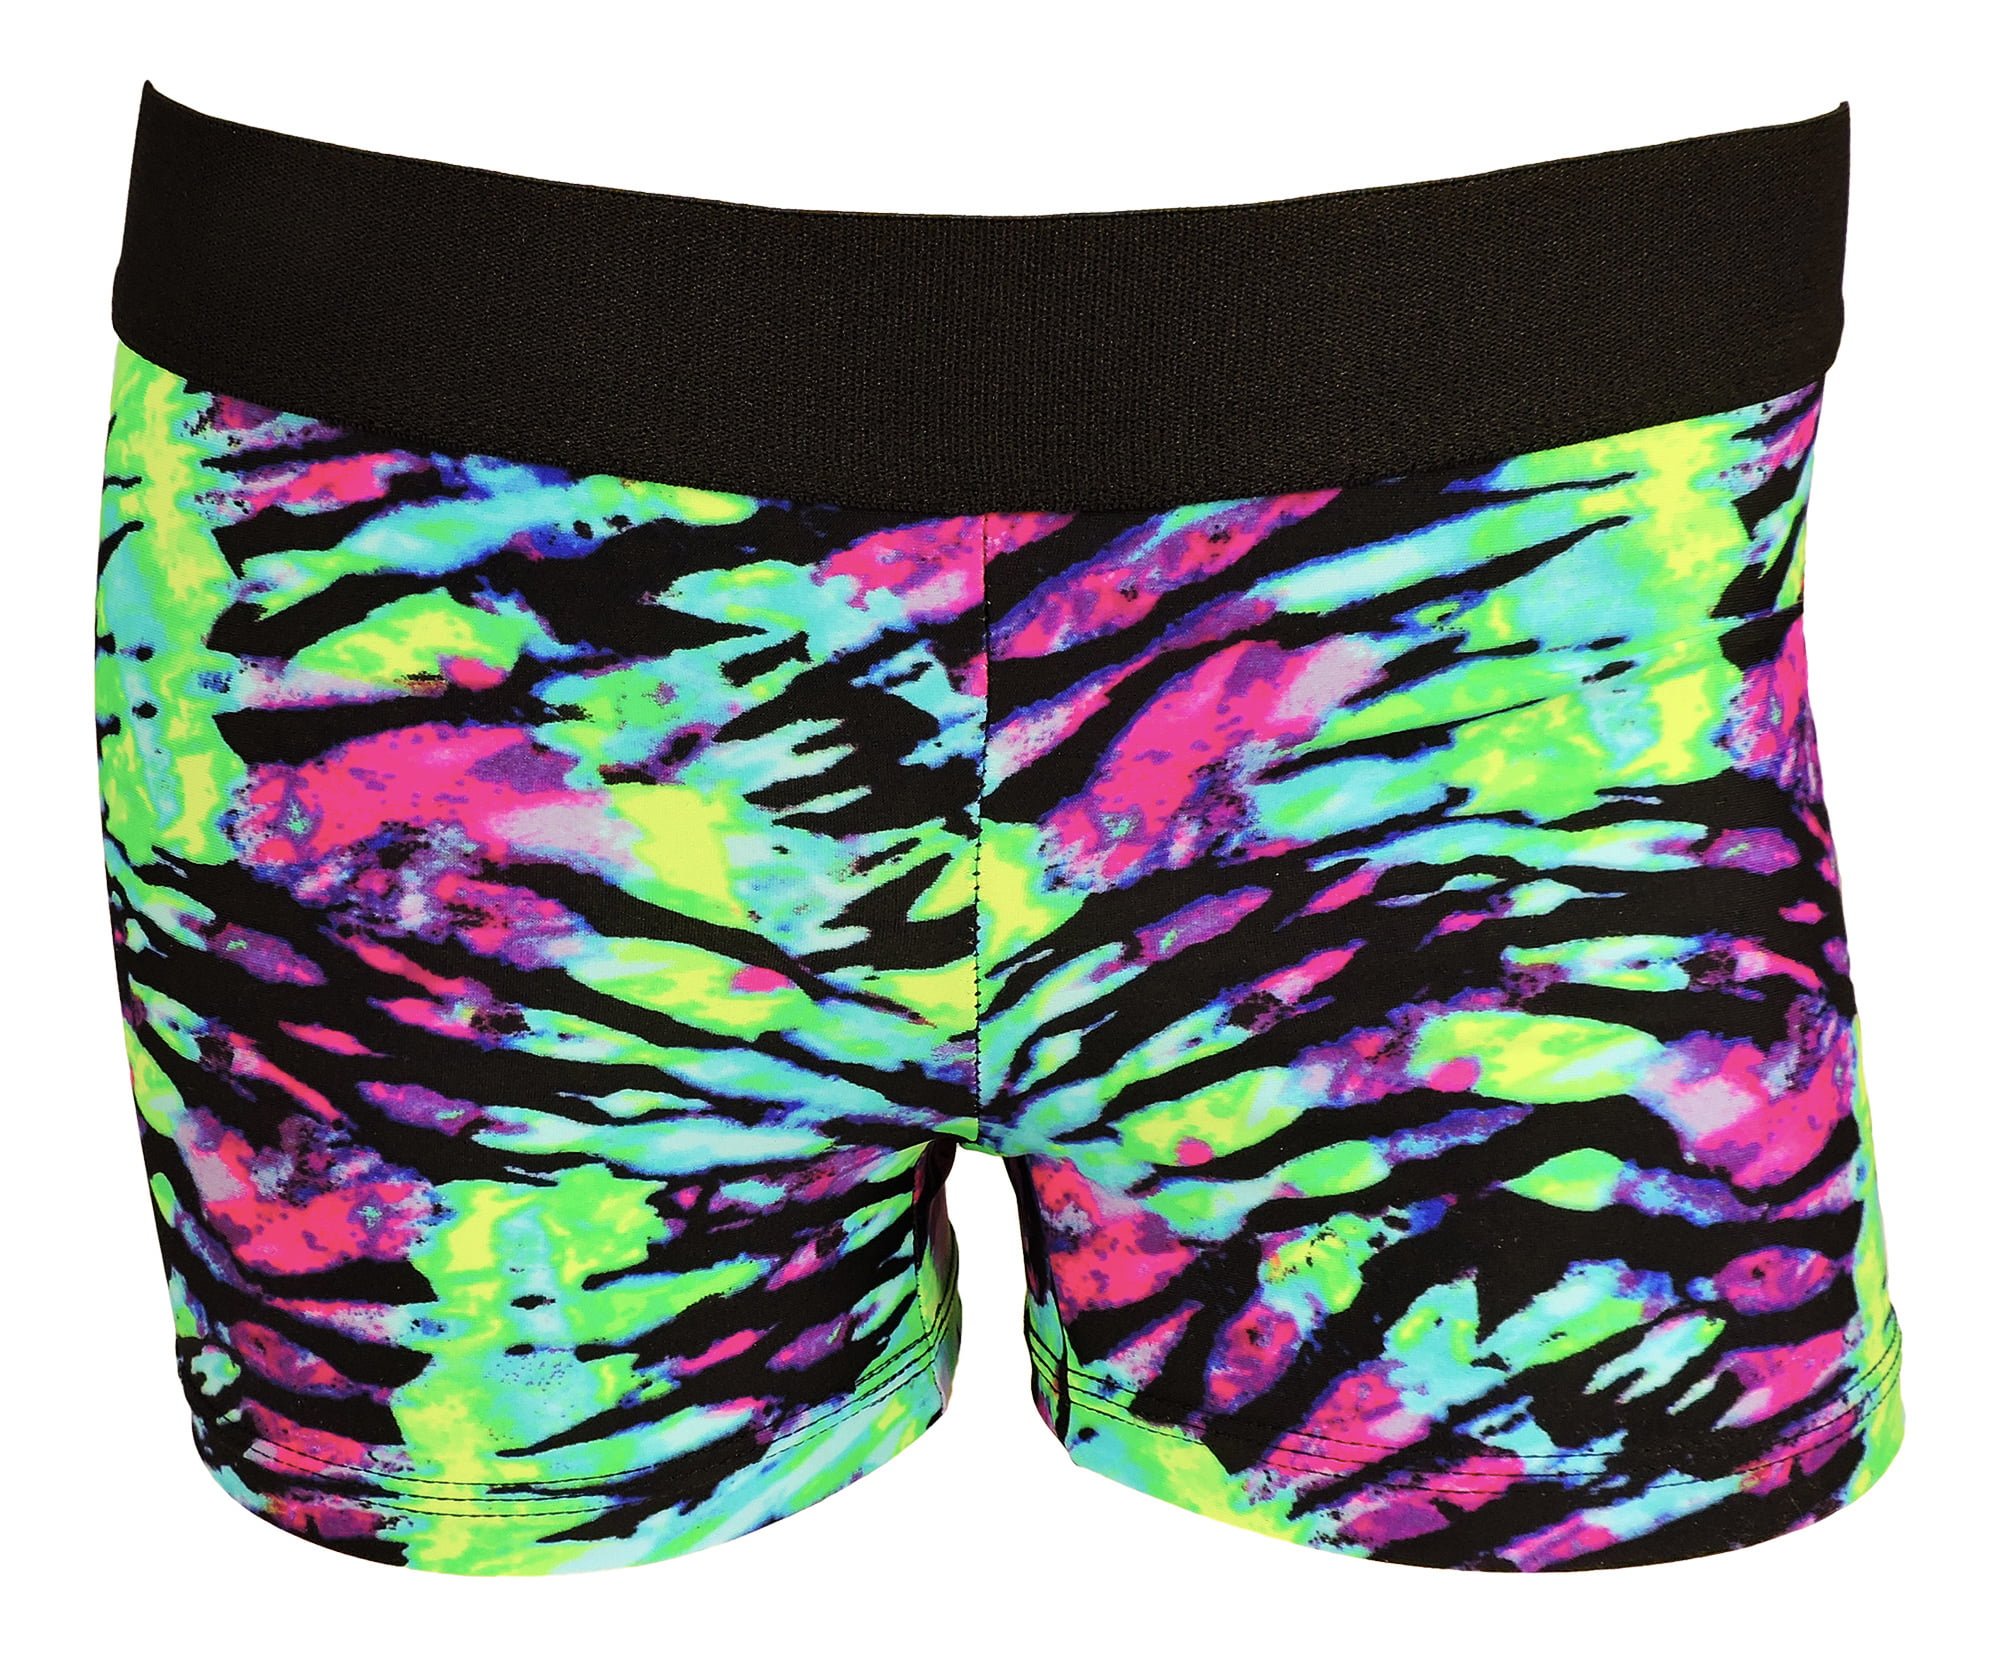 VOLLEYBALL EXERCISE COMPRESSION SHORTS NEON TIE DYE PATTERN WOMENS SIZES NWOT 